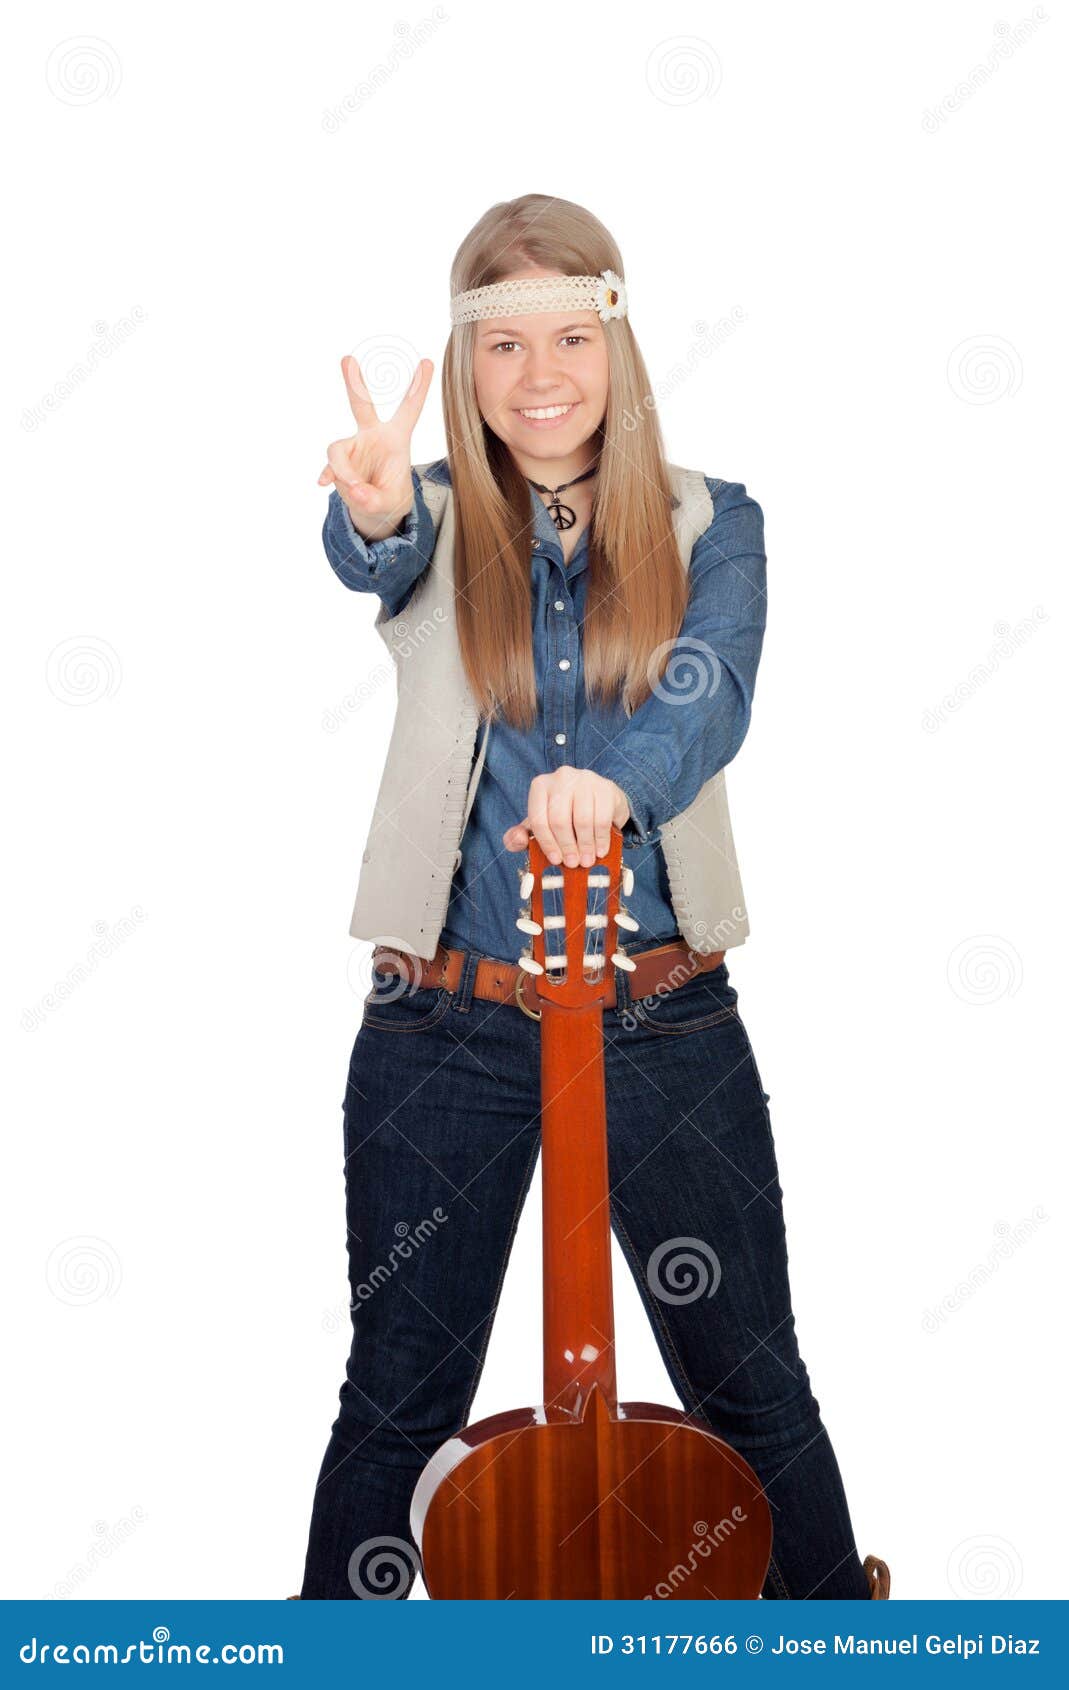 ... girl with hippie clothes and a guitar isolated on white background